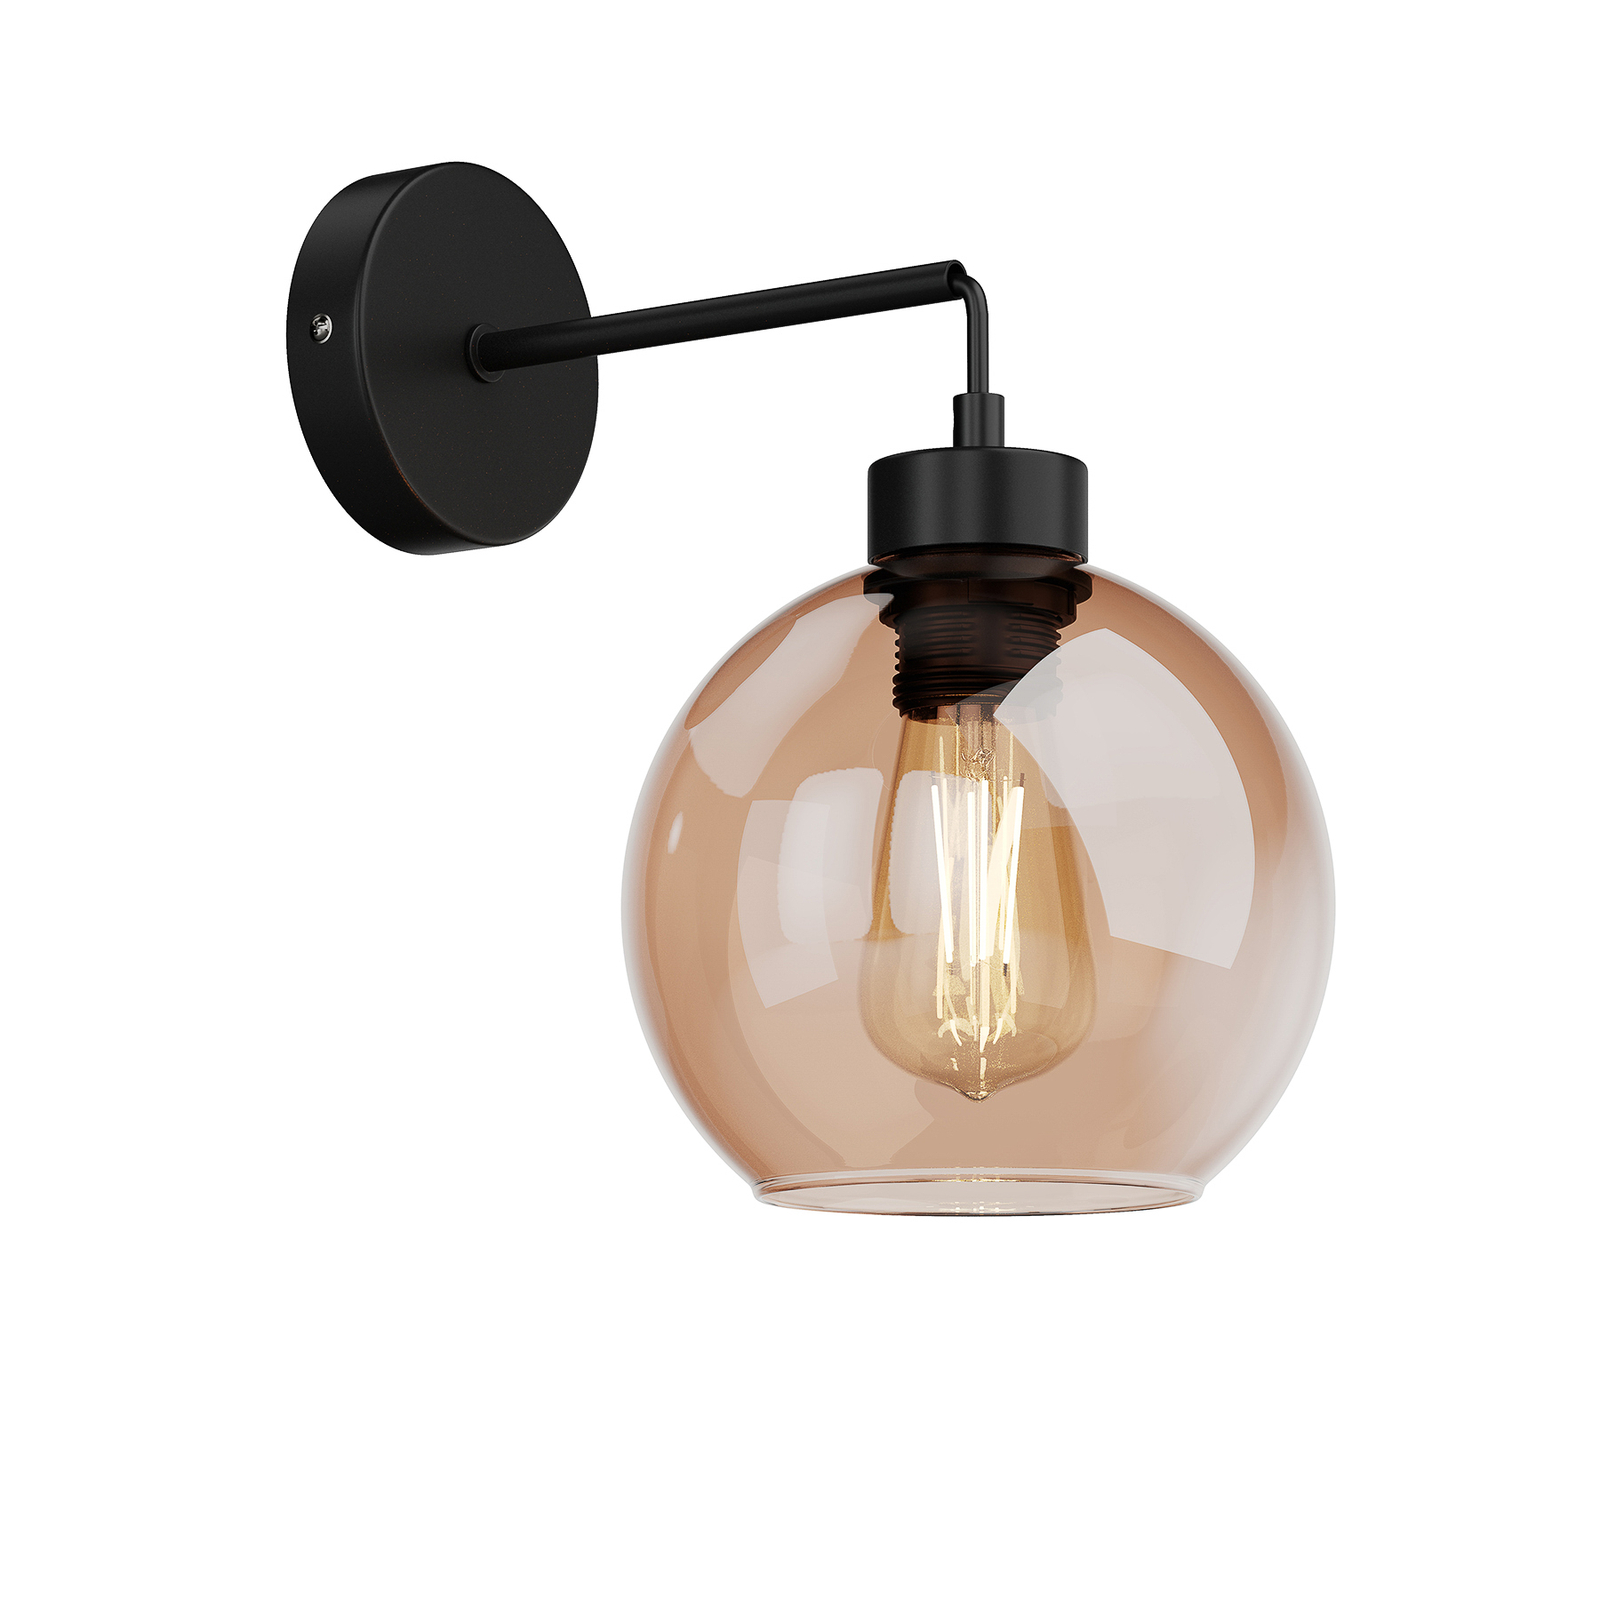 Cubus wall light made of glass, black/amber